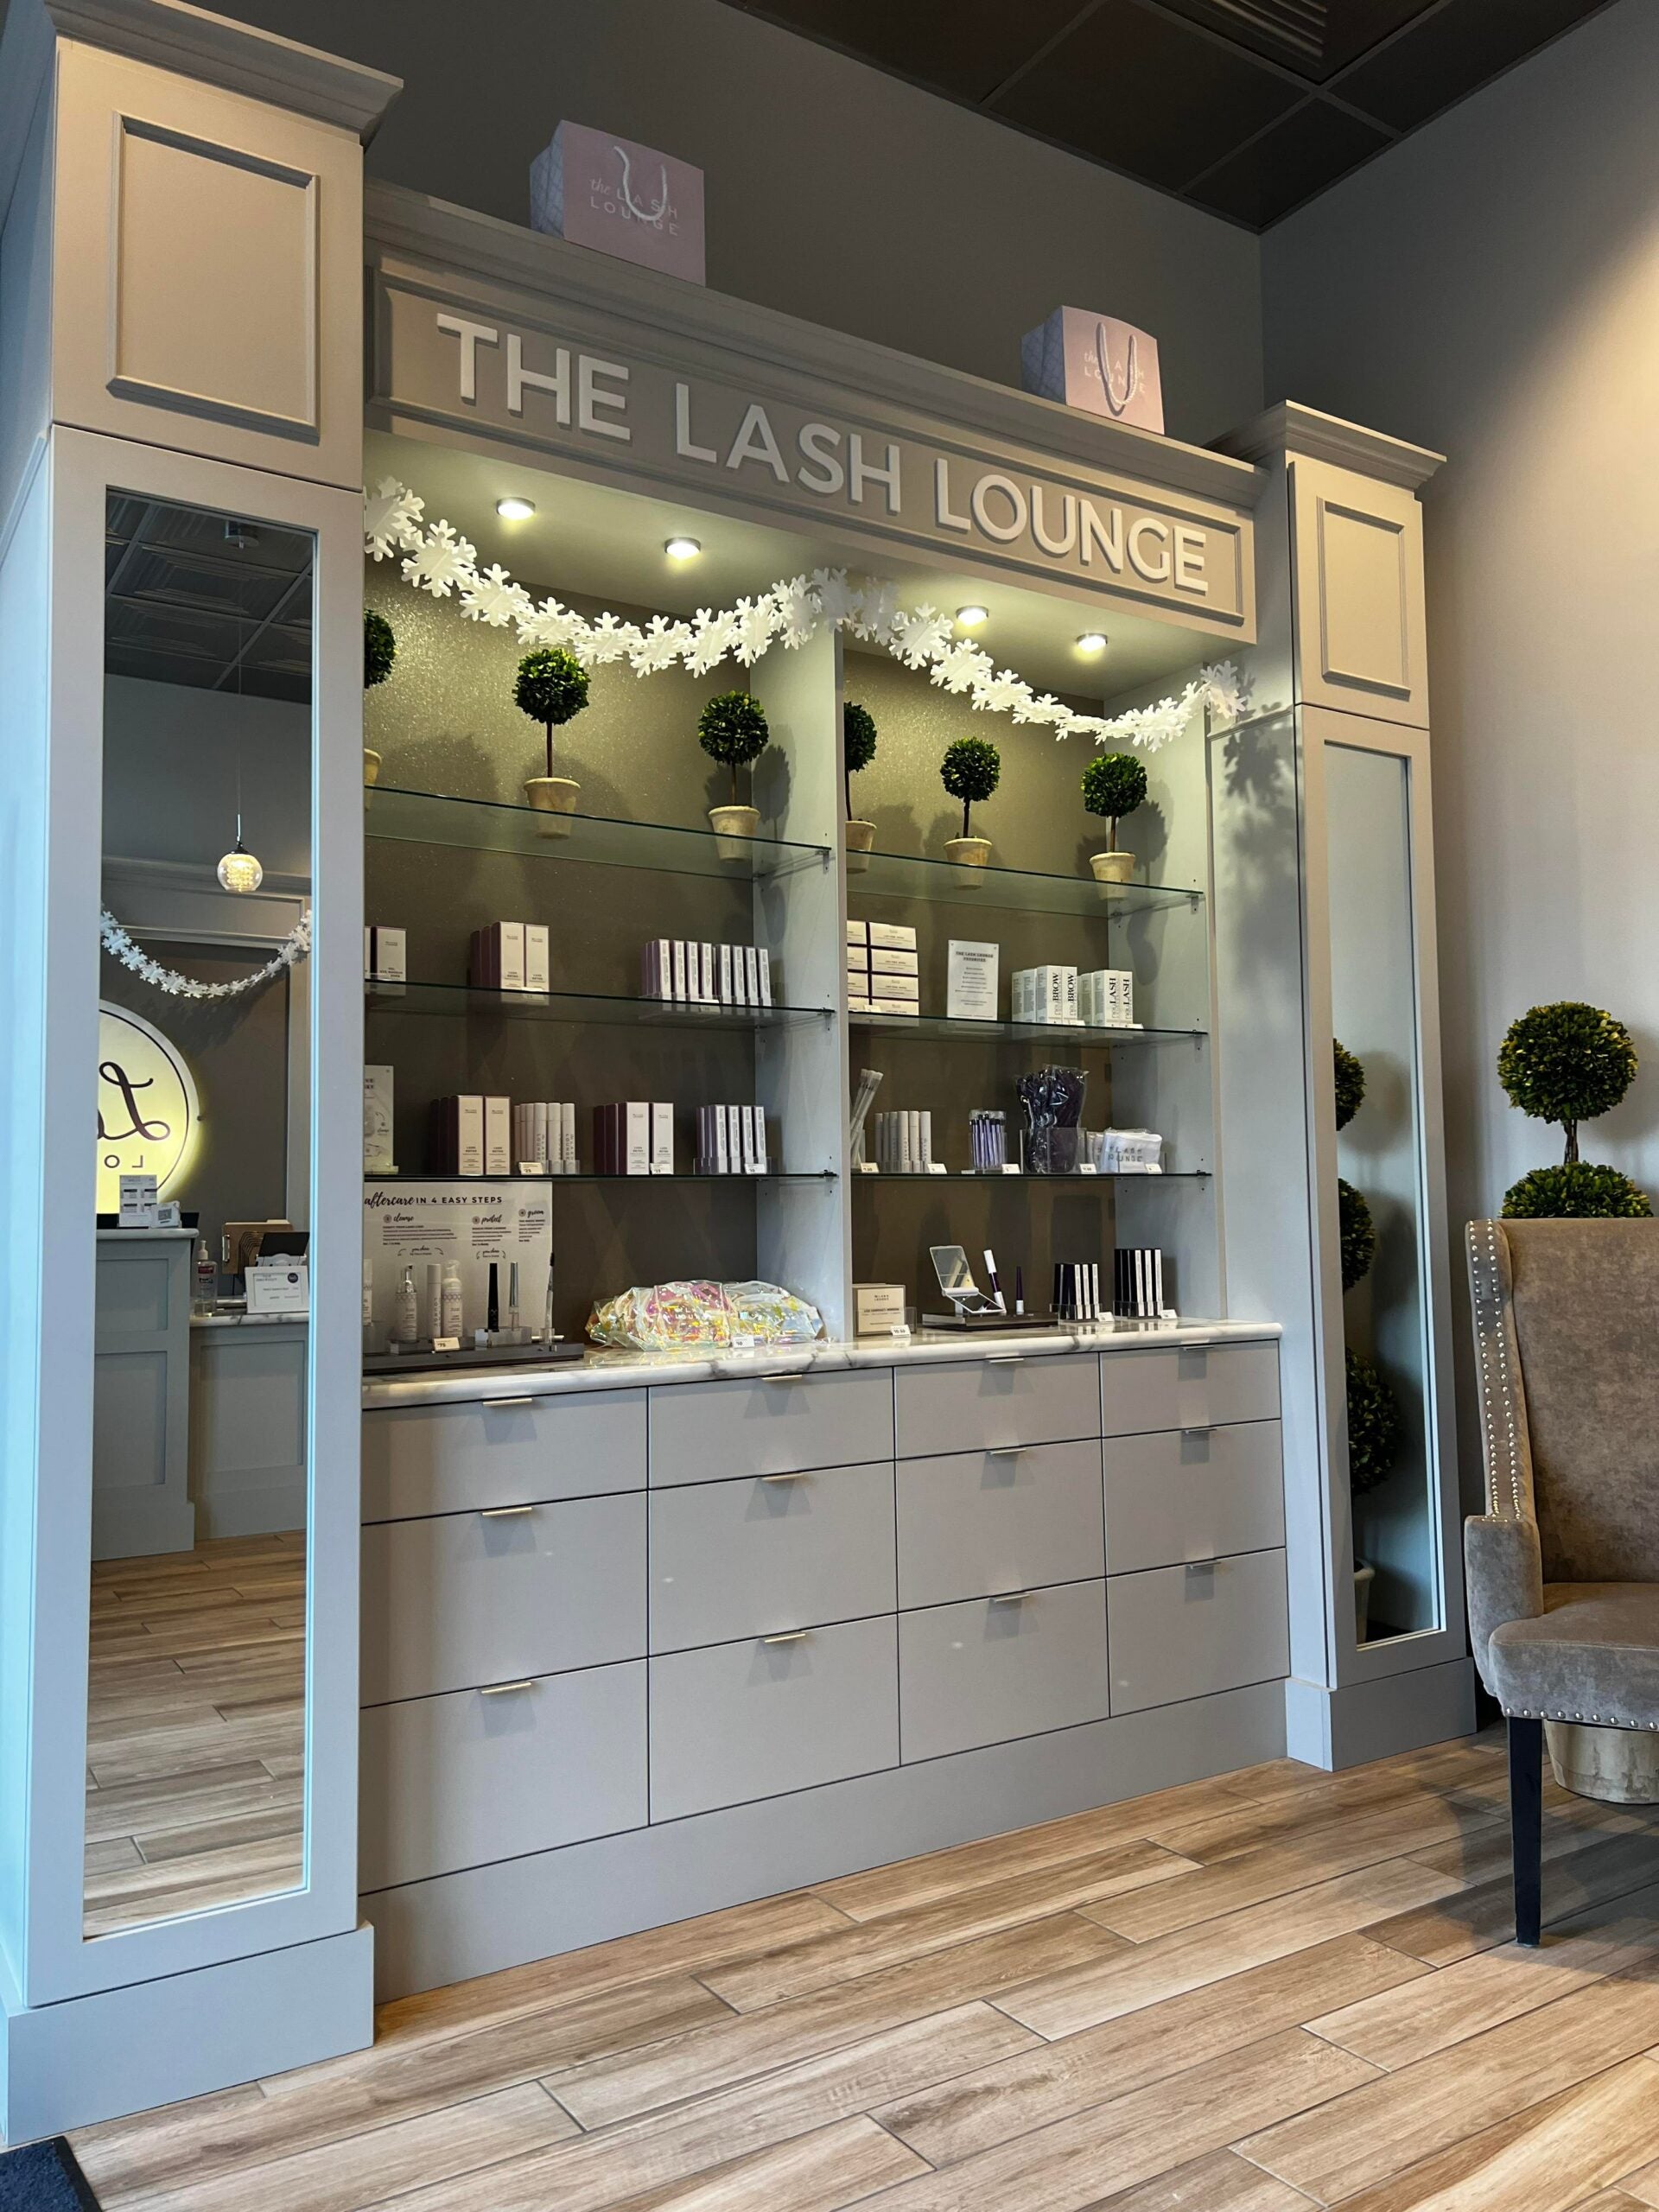 Products Wall of The Lash Lounge Lone Tree